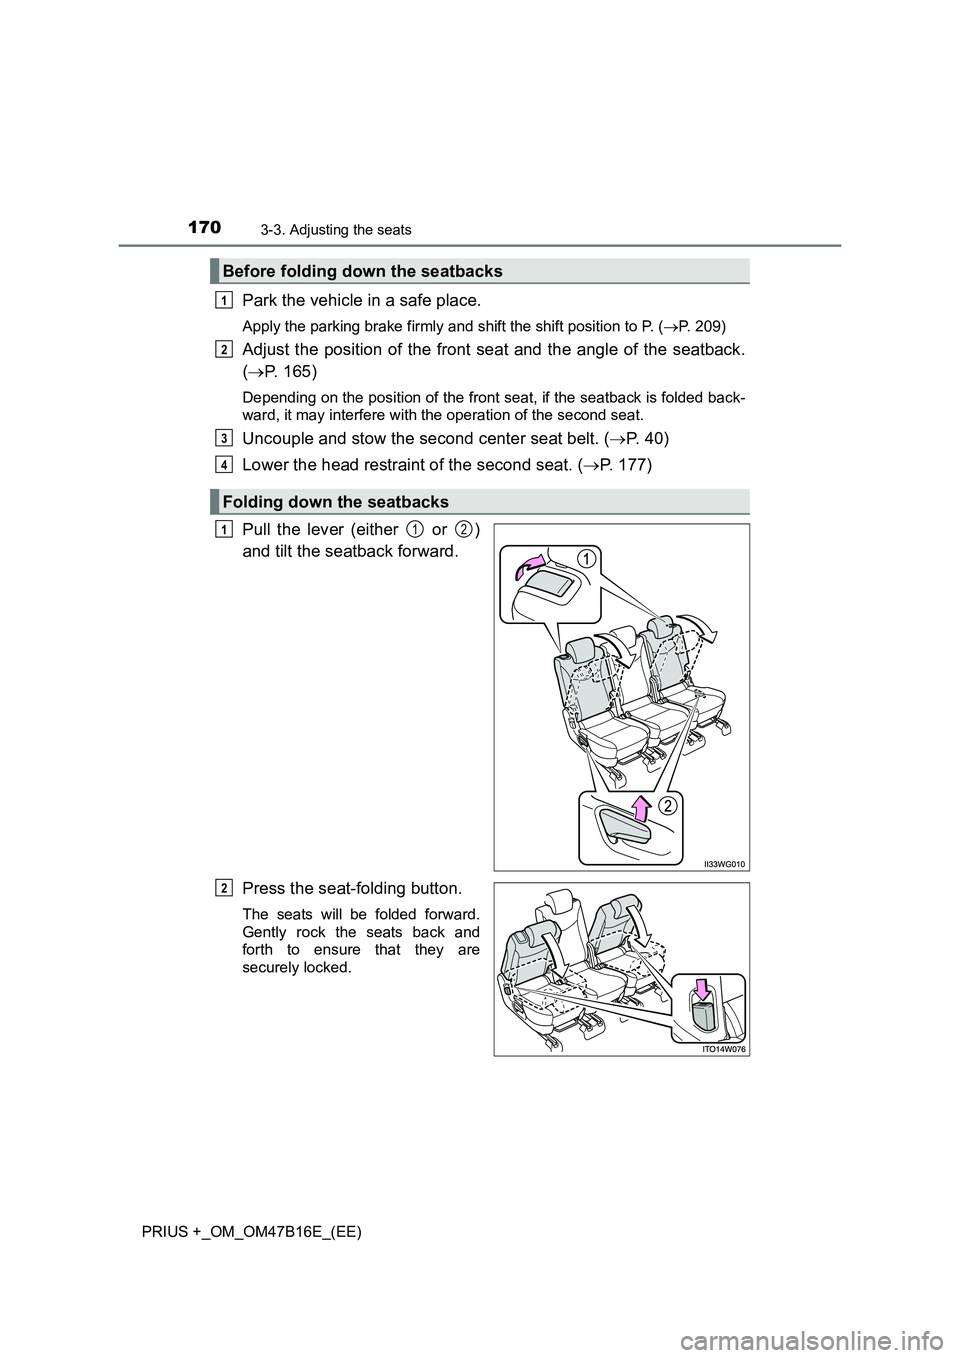 TOYOTA PRIUS PLUS 2015  Owners Manual 1703-3. Adjusting the seats
PRIUS +_OM_OM47B16E_(EE)
Park the vehicle in a safe place.
Apply the parking brake firmly and shift the shift position to P. (→P. 209)
Adjust the position of the front se